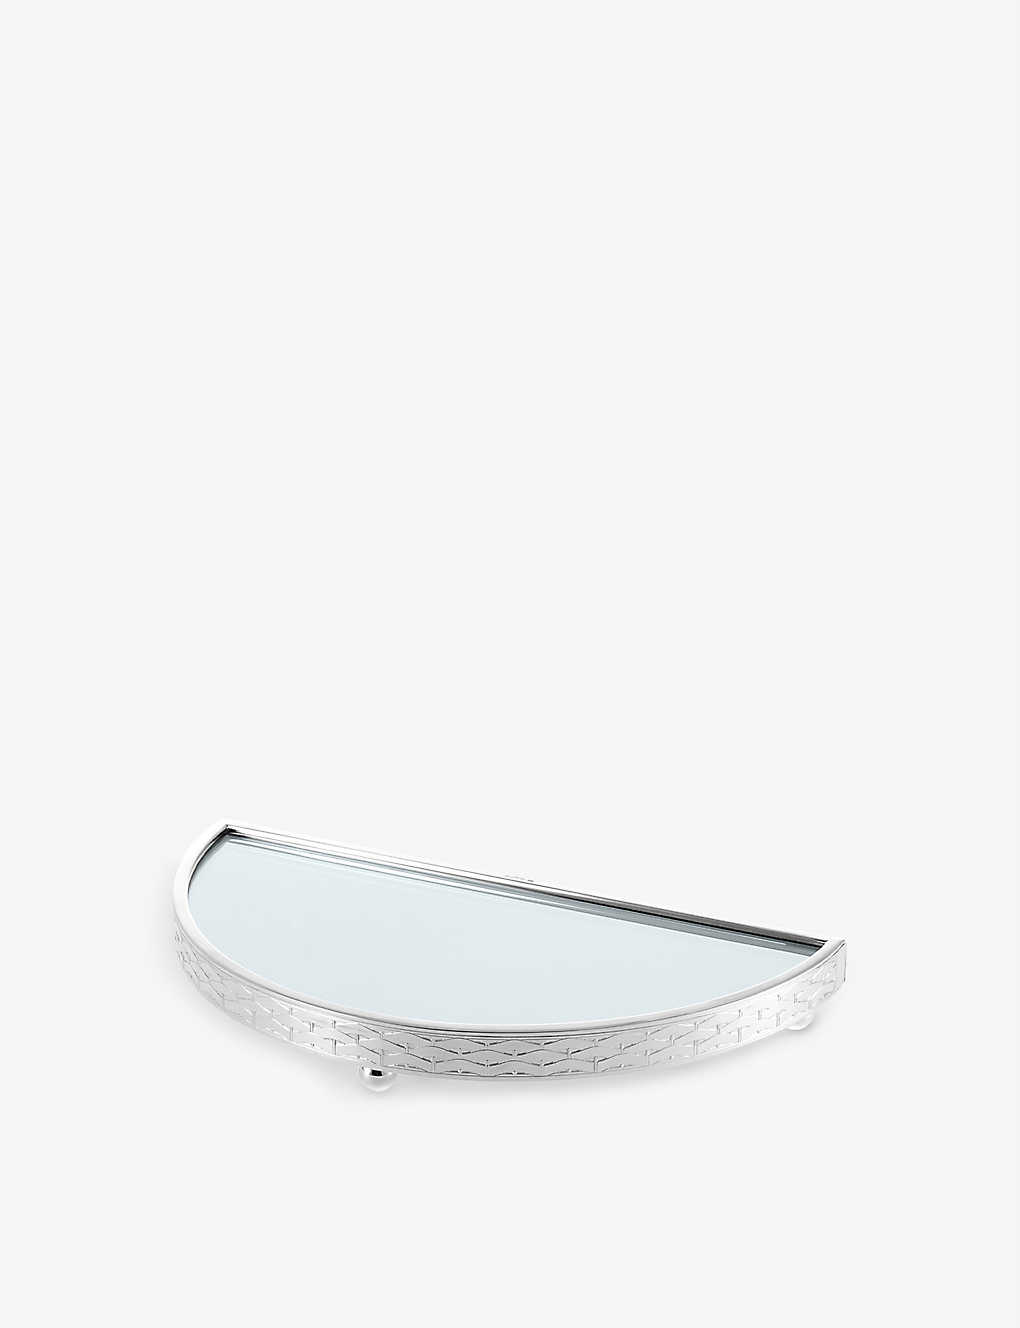 Christofle Seve D'argent Silver-plated Metal Tray 32cm